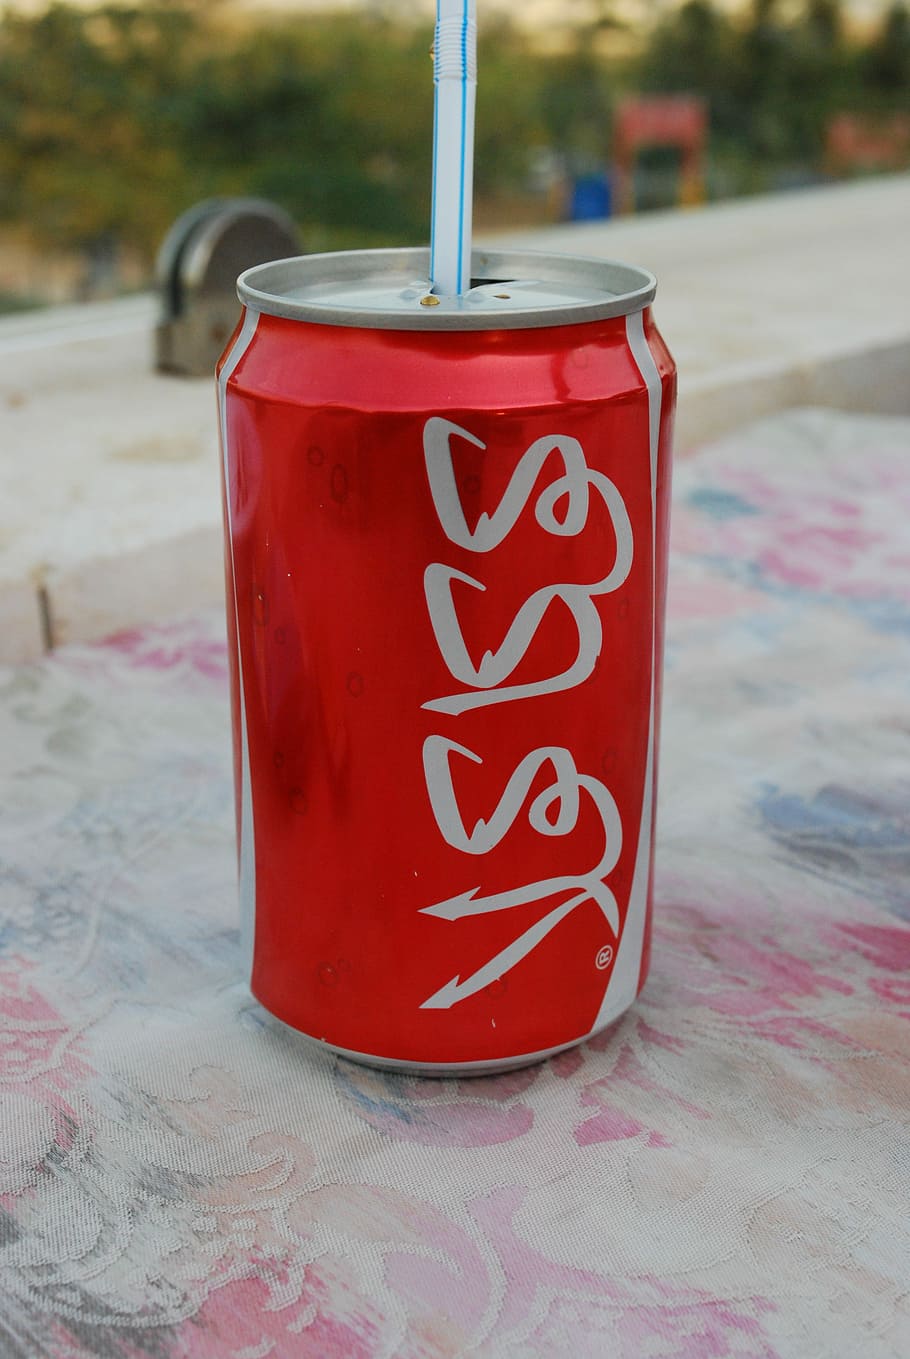 Jordan, Holiday, Trivial, Cola, red, day, focus on foreground, outdoors, close-up, container